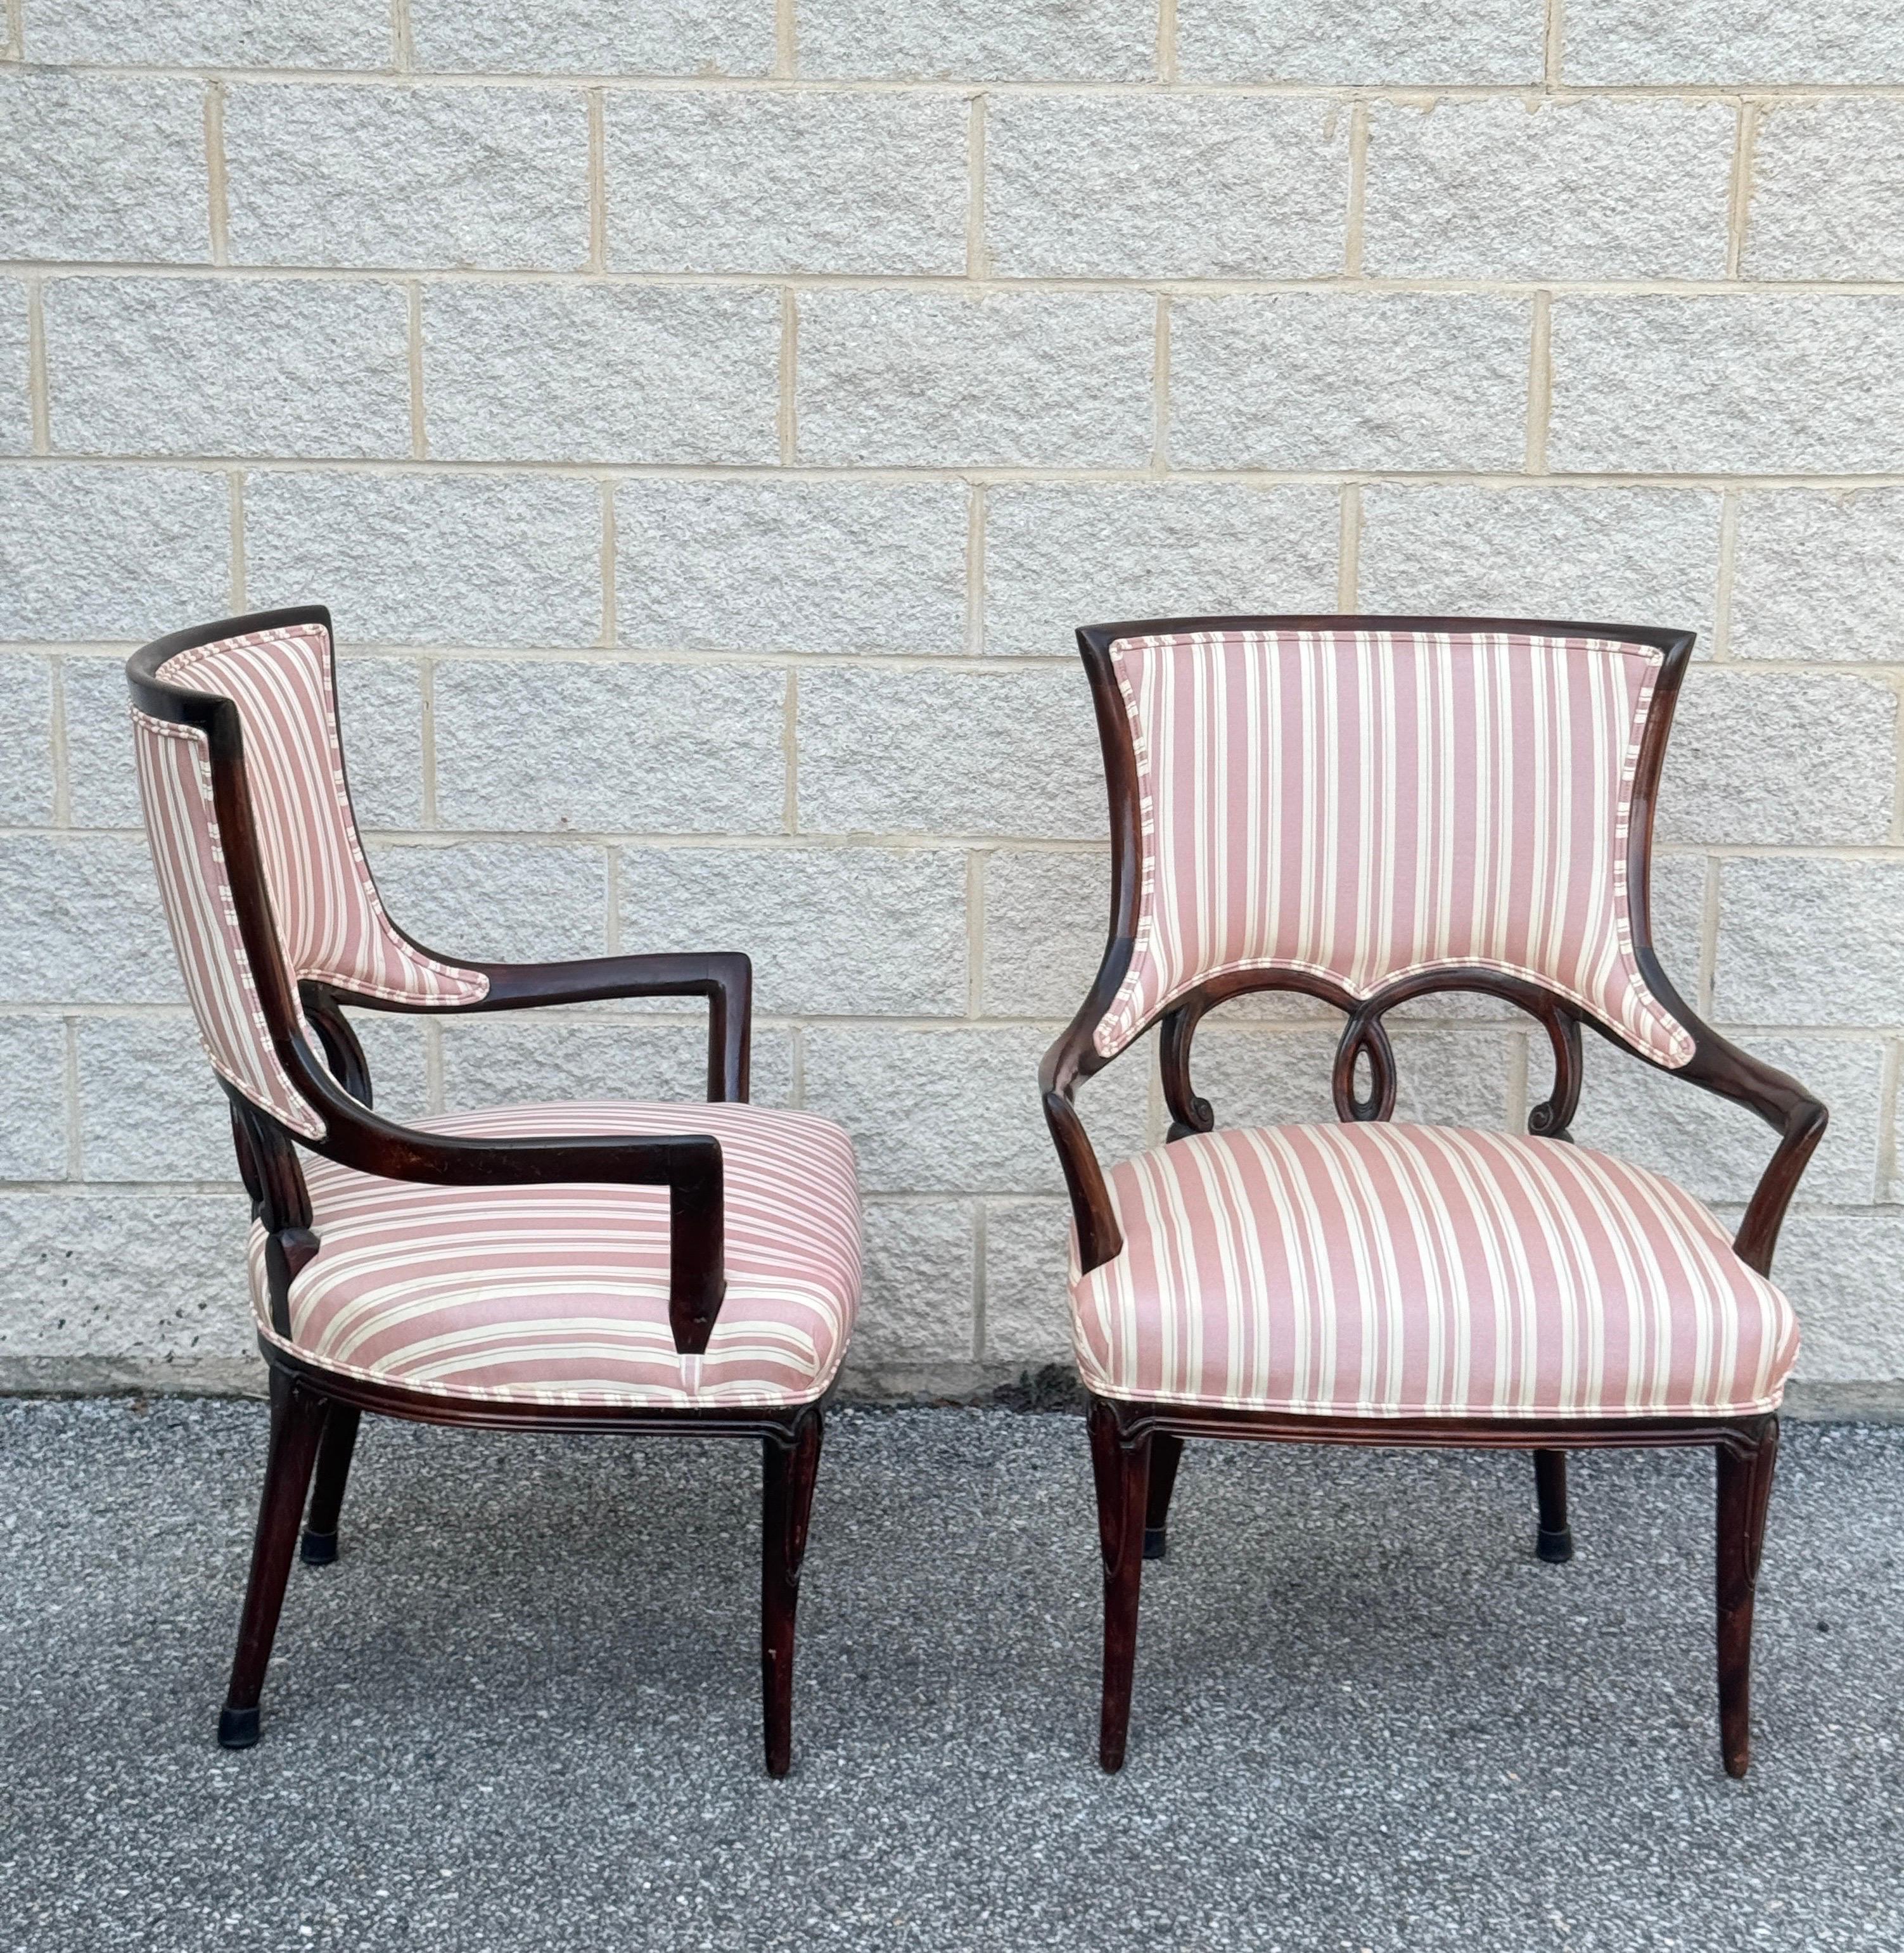 A Pair of 1950s Grosfeld House Style ebonized armchairs with striped upholstery.